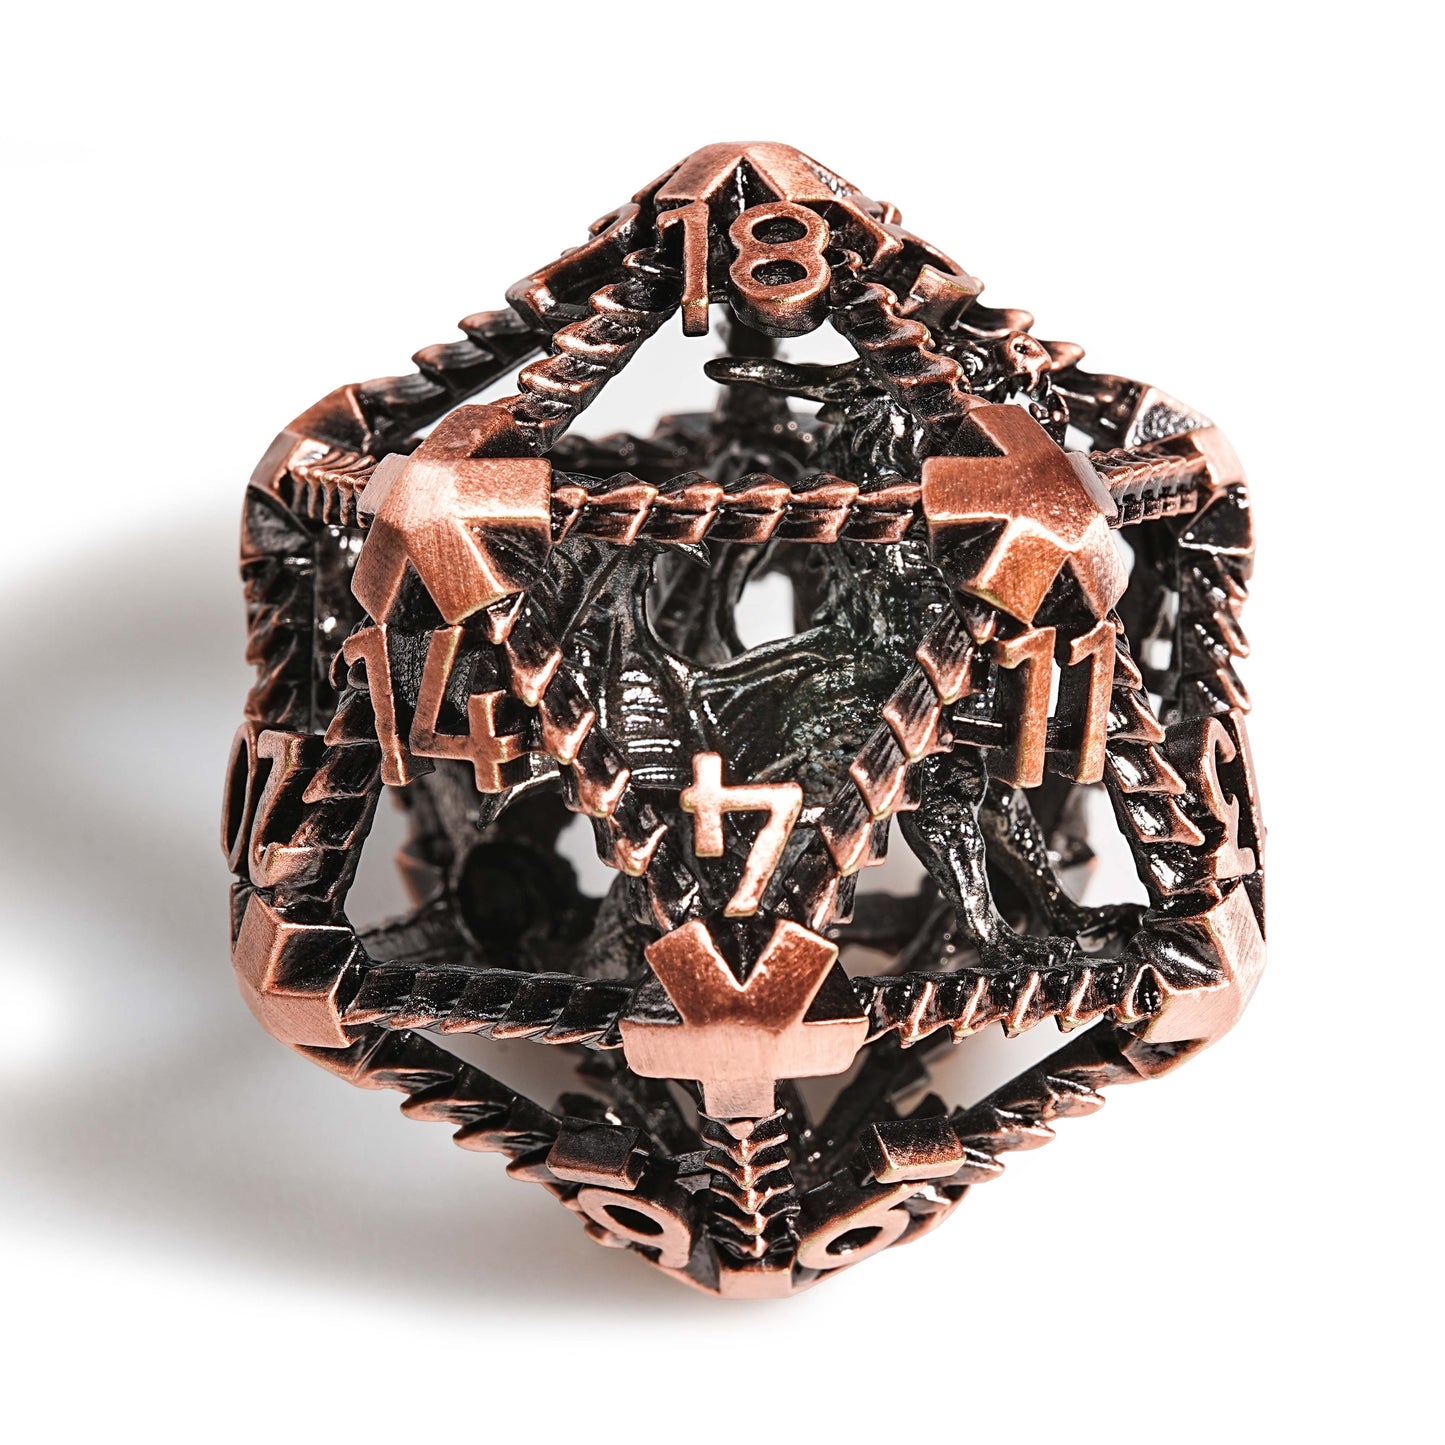 40mm Metal Hollow D20 Evil Dragon Dice Set, Available in 3 colors